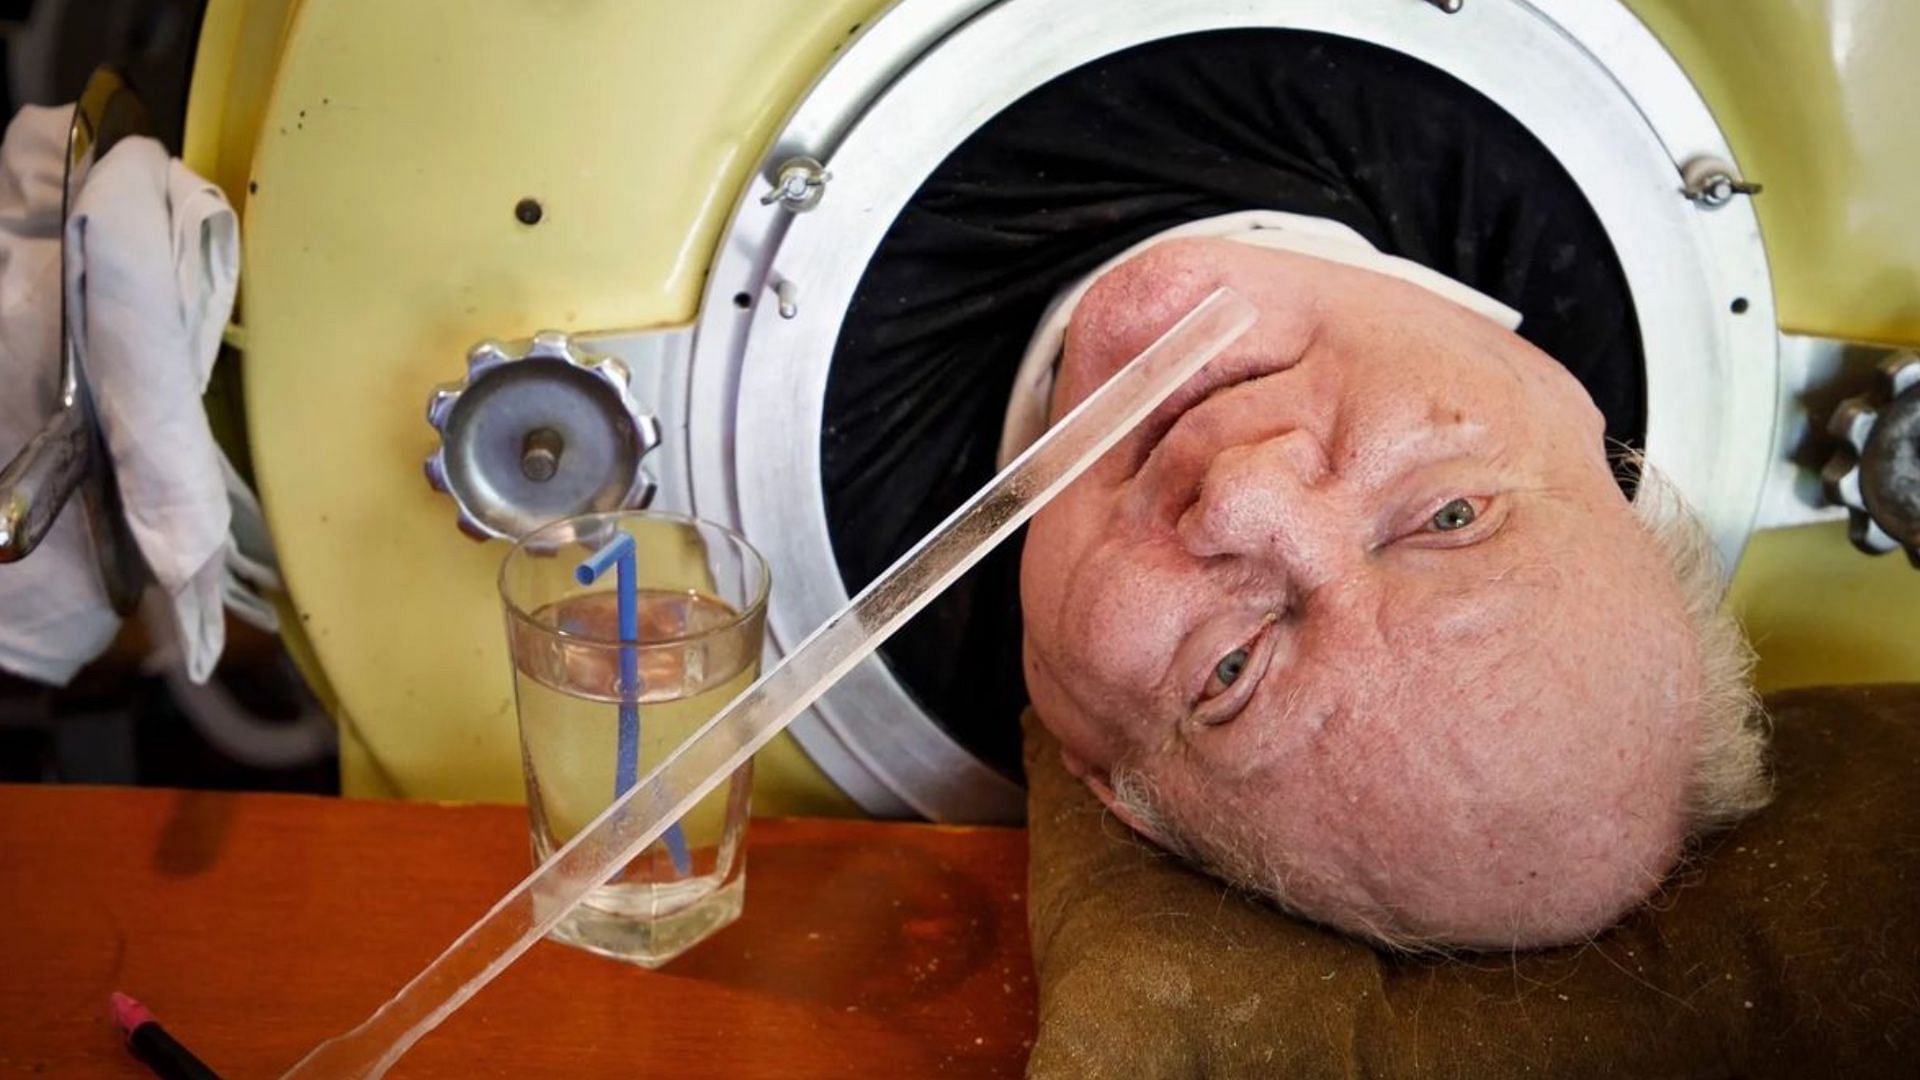 Paul Alezander the man that has lived for 70 years in an Iron Lung. (Image via Guiness World Record)